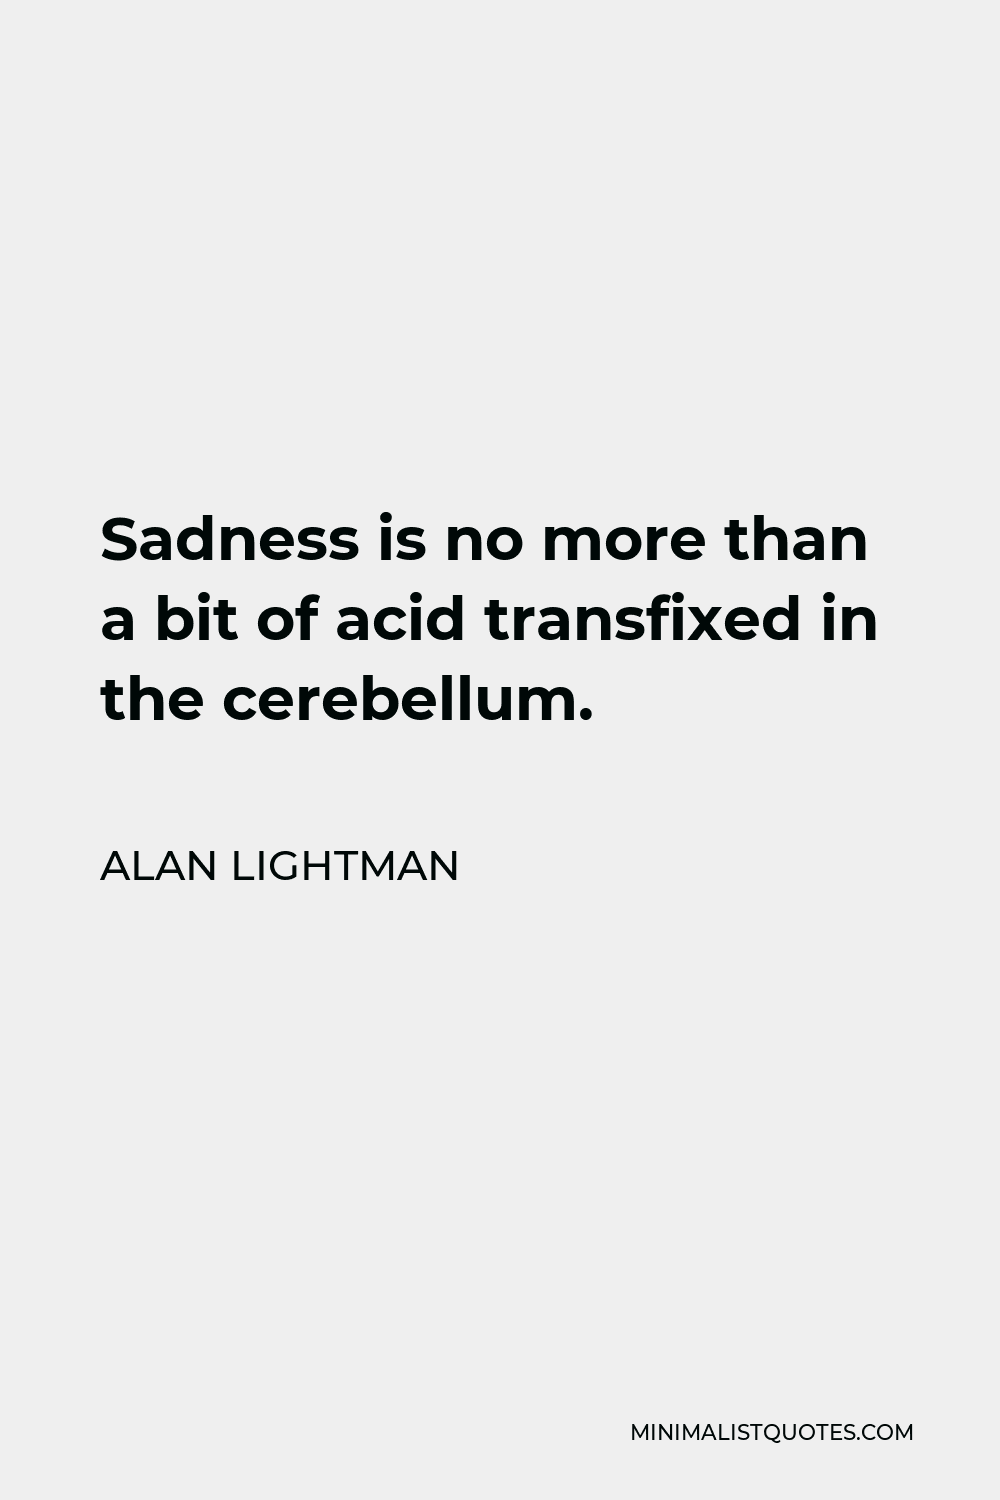 Alan Lightman Quote - Sadness is no more than a bit of acid transfixed in the cerebellum.